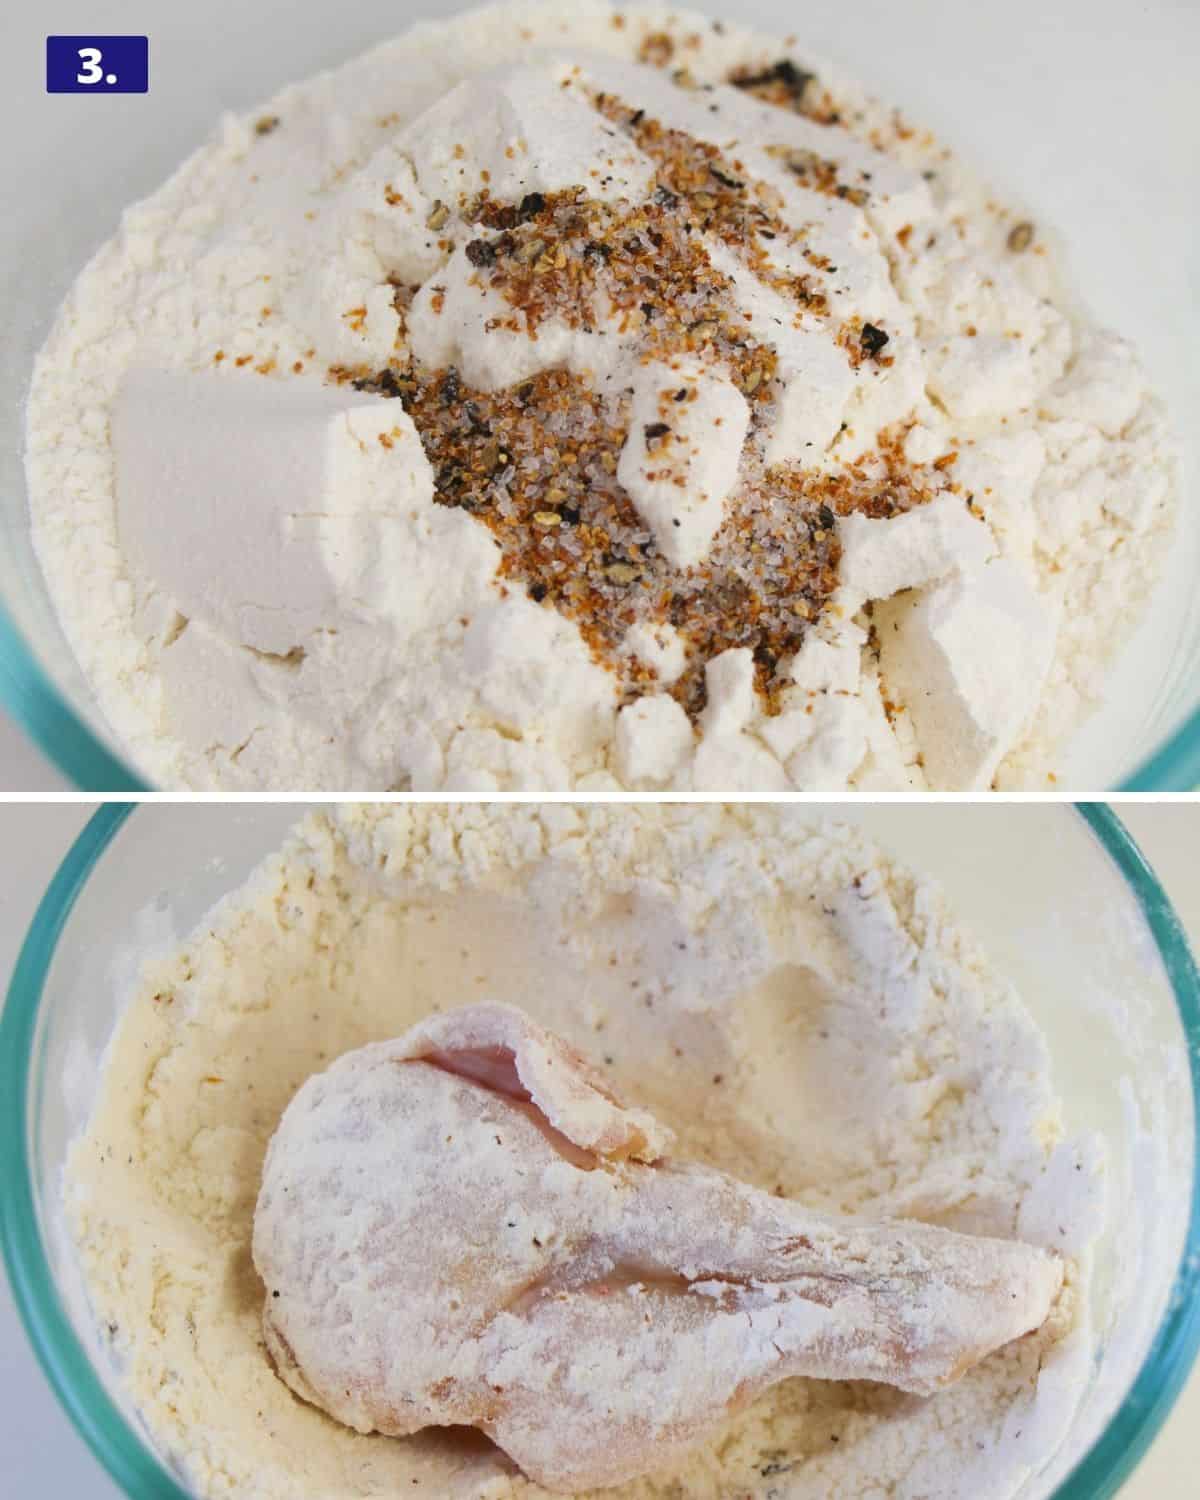 2 photos. 1, a bowl of flour seasoned with lemon pepper seasoning. photo 2, a raw chicken wing coated in flour. 